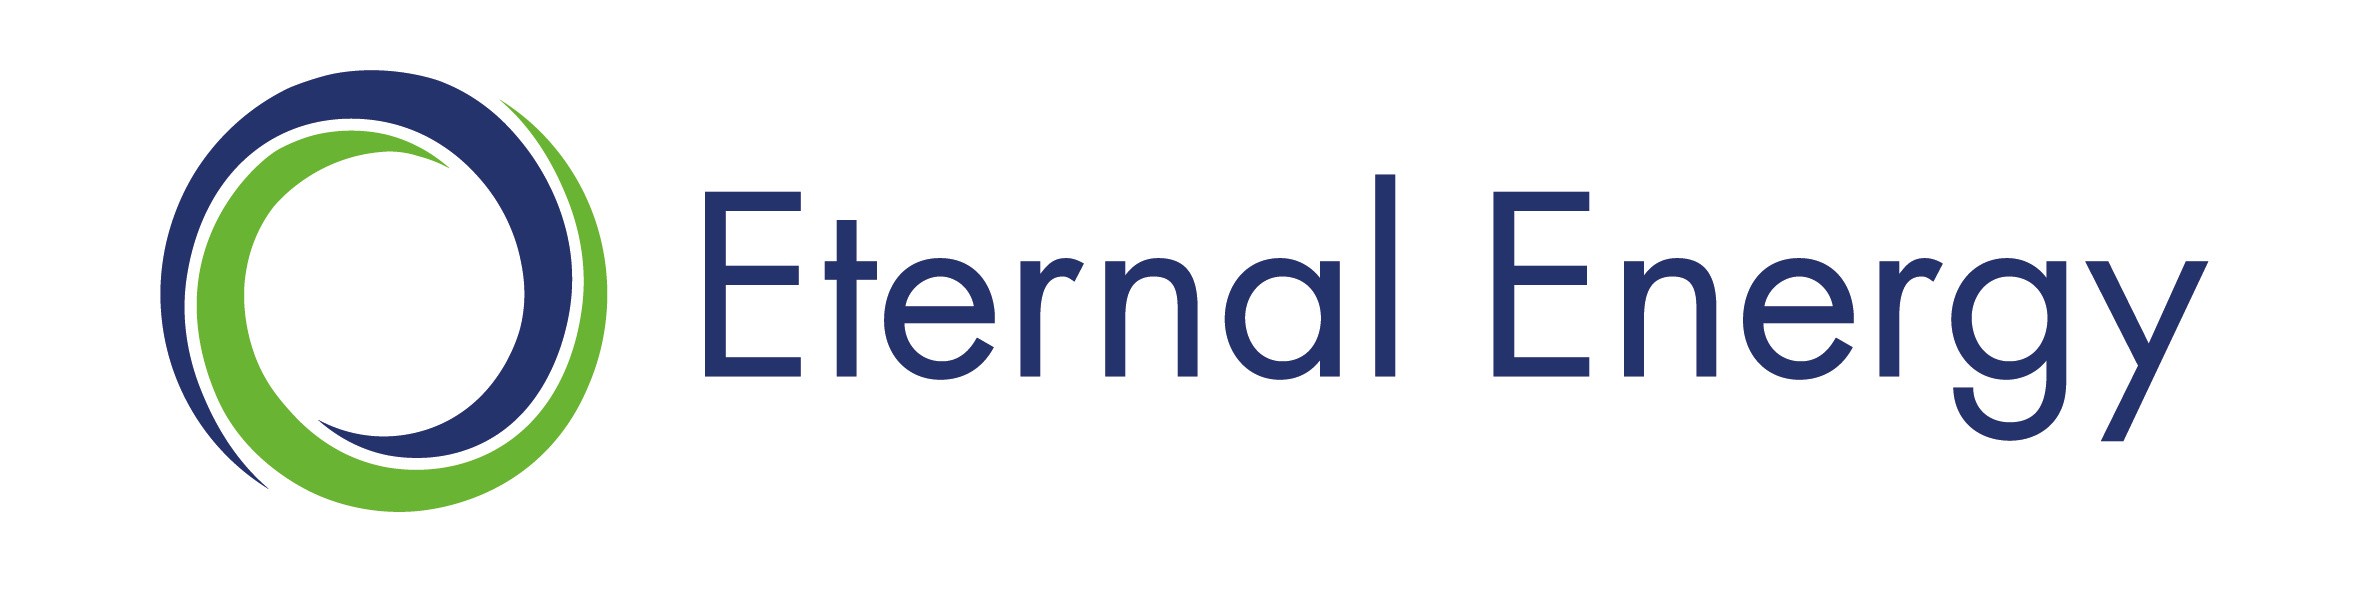 Eternal Energy is a multi-disciplinary, multi-national team of highly experienced energy industry executives – delivering sustainable business growth and enhanced bottom-line profitability to technology firms in the energy sector.
With teams on the ground in the Middle East and the USA, we support businesses of all sizes – delivering breakthrough results on a wide range of projects.